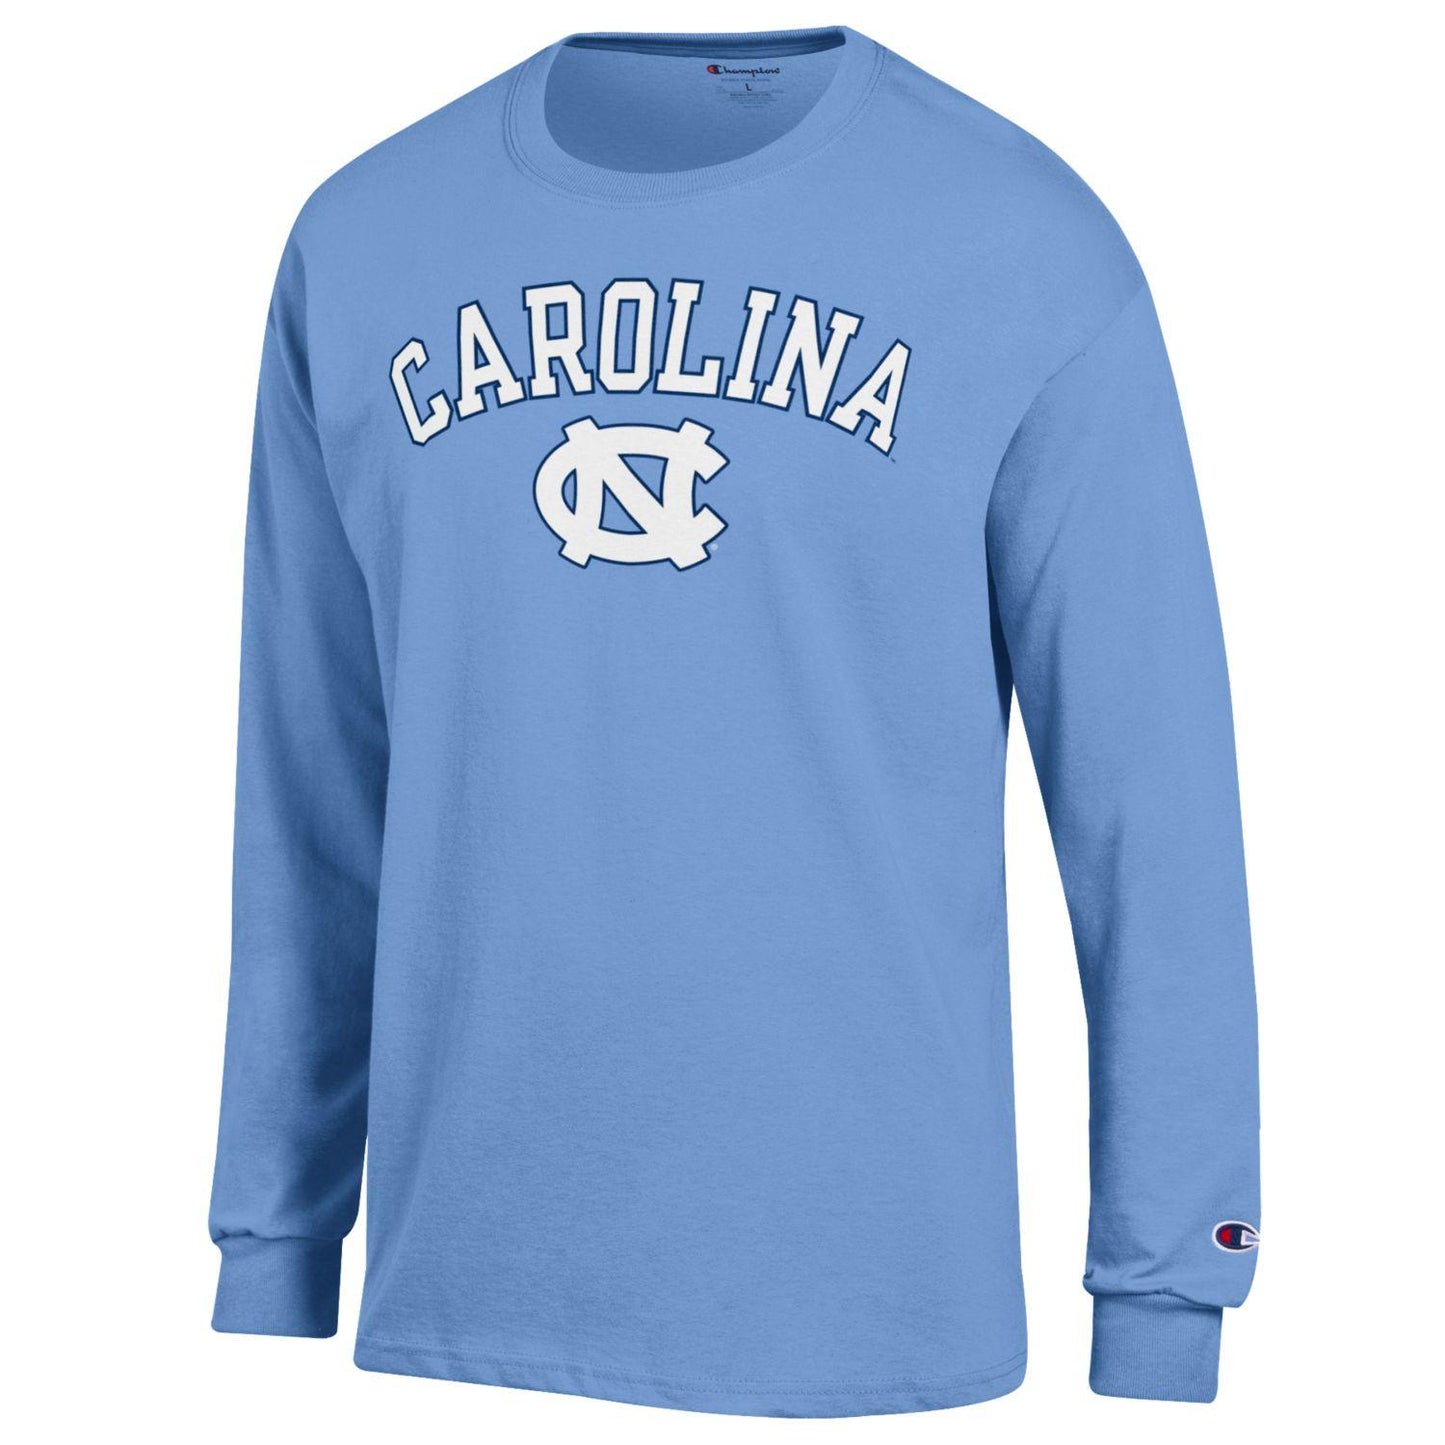 UNC Long Sleeve T-Shirt by Champion